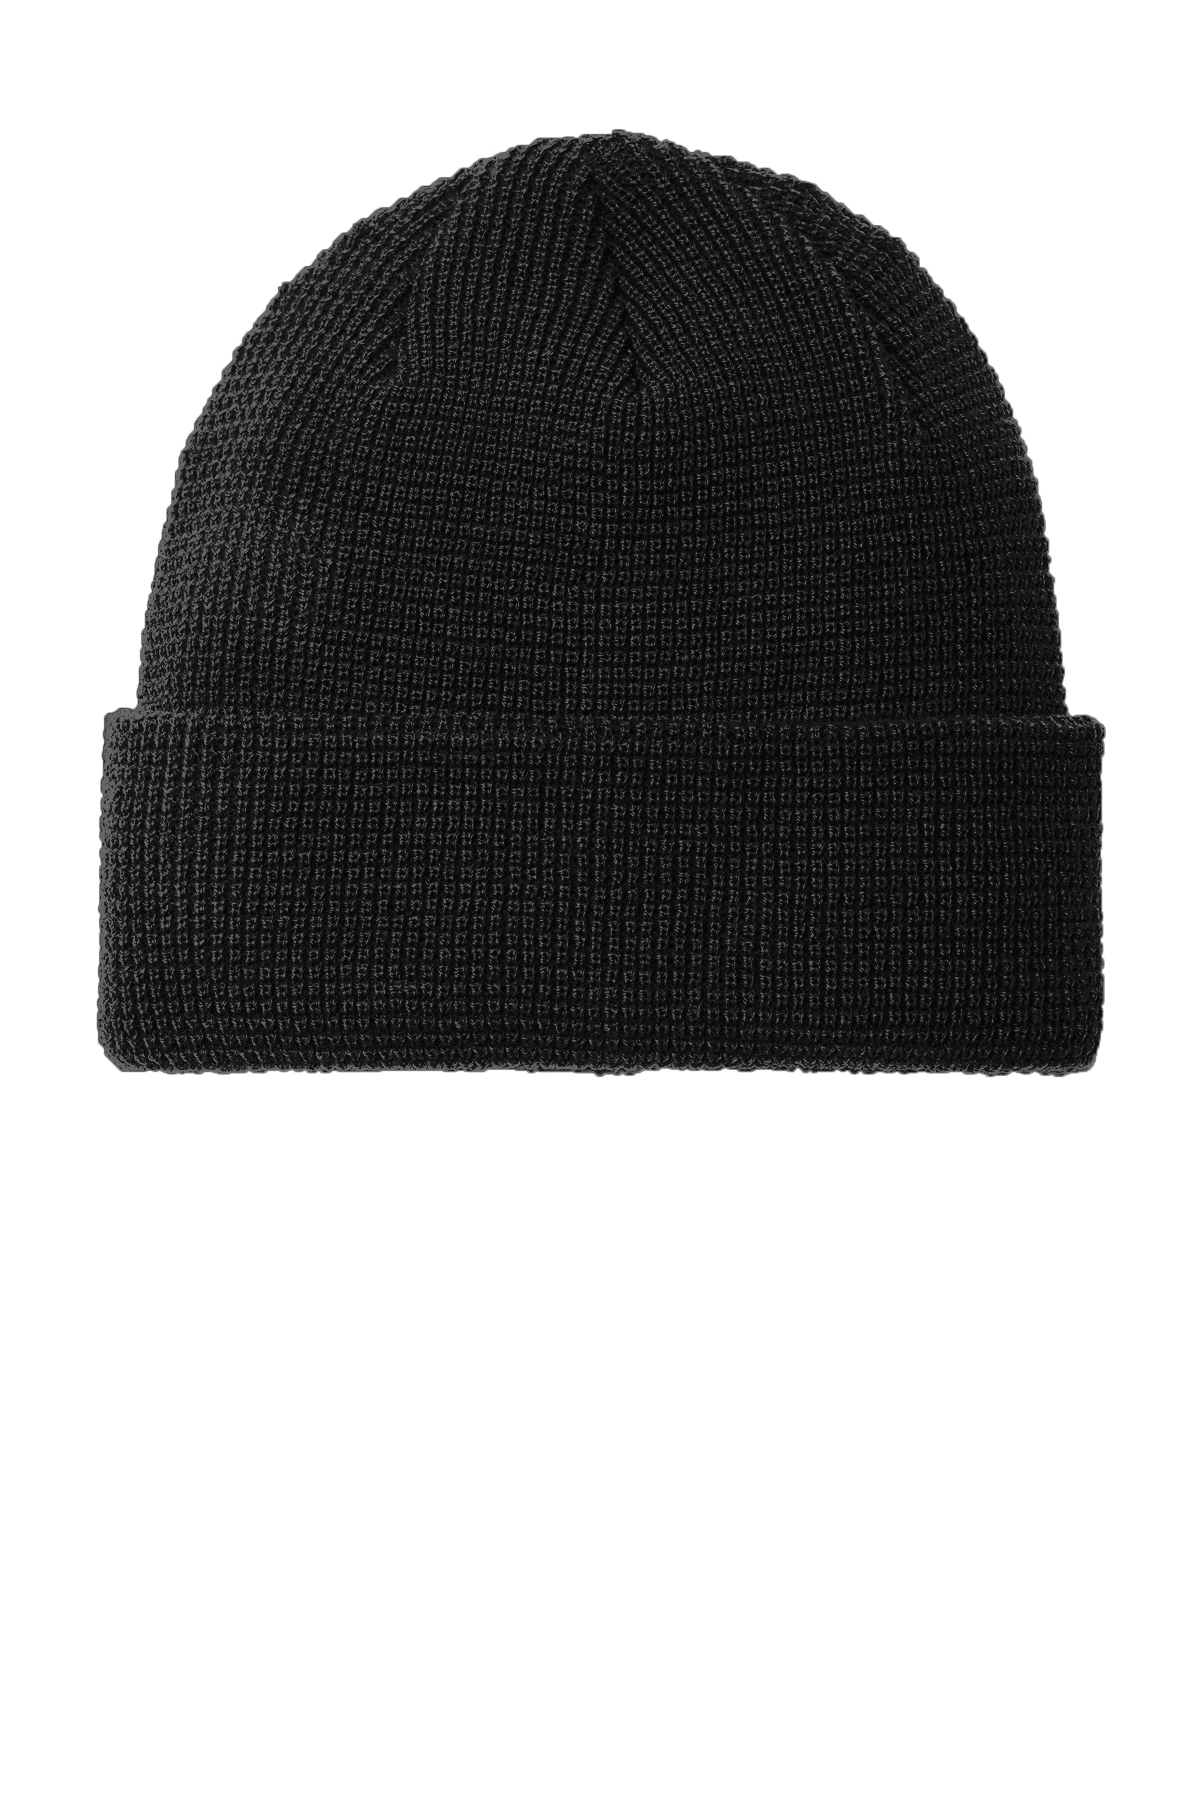 Port Authority Thermal | Cuffed Beanie | Authority Product Knit Port